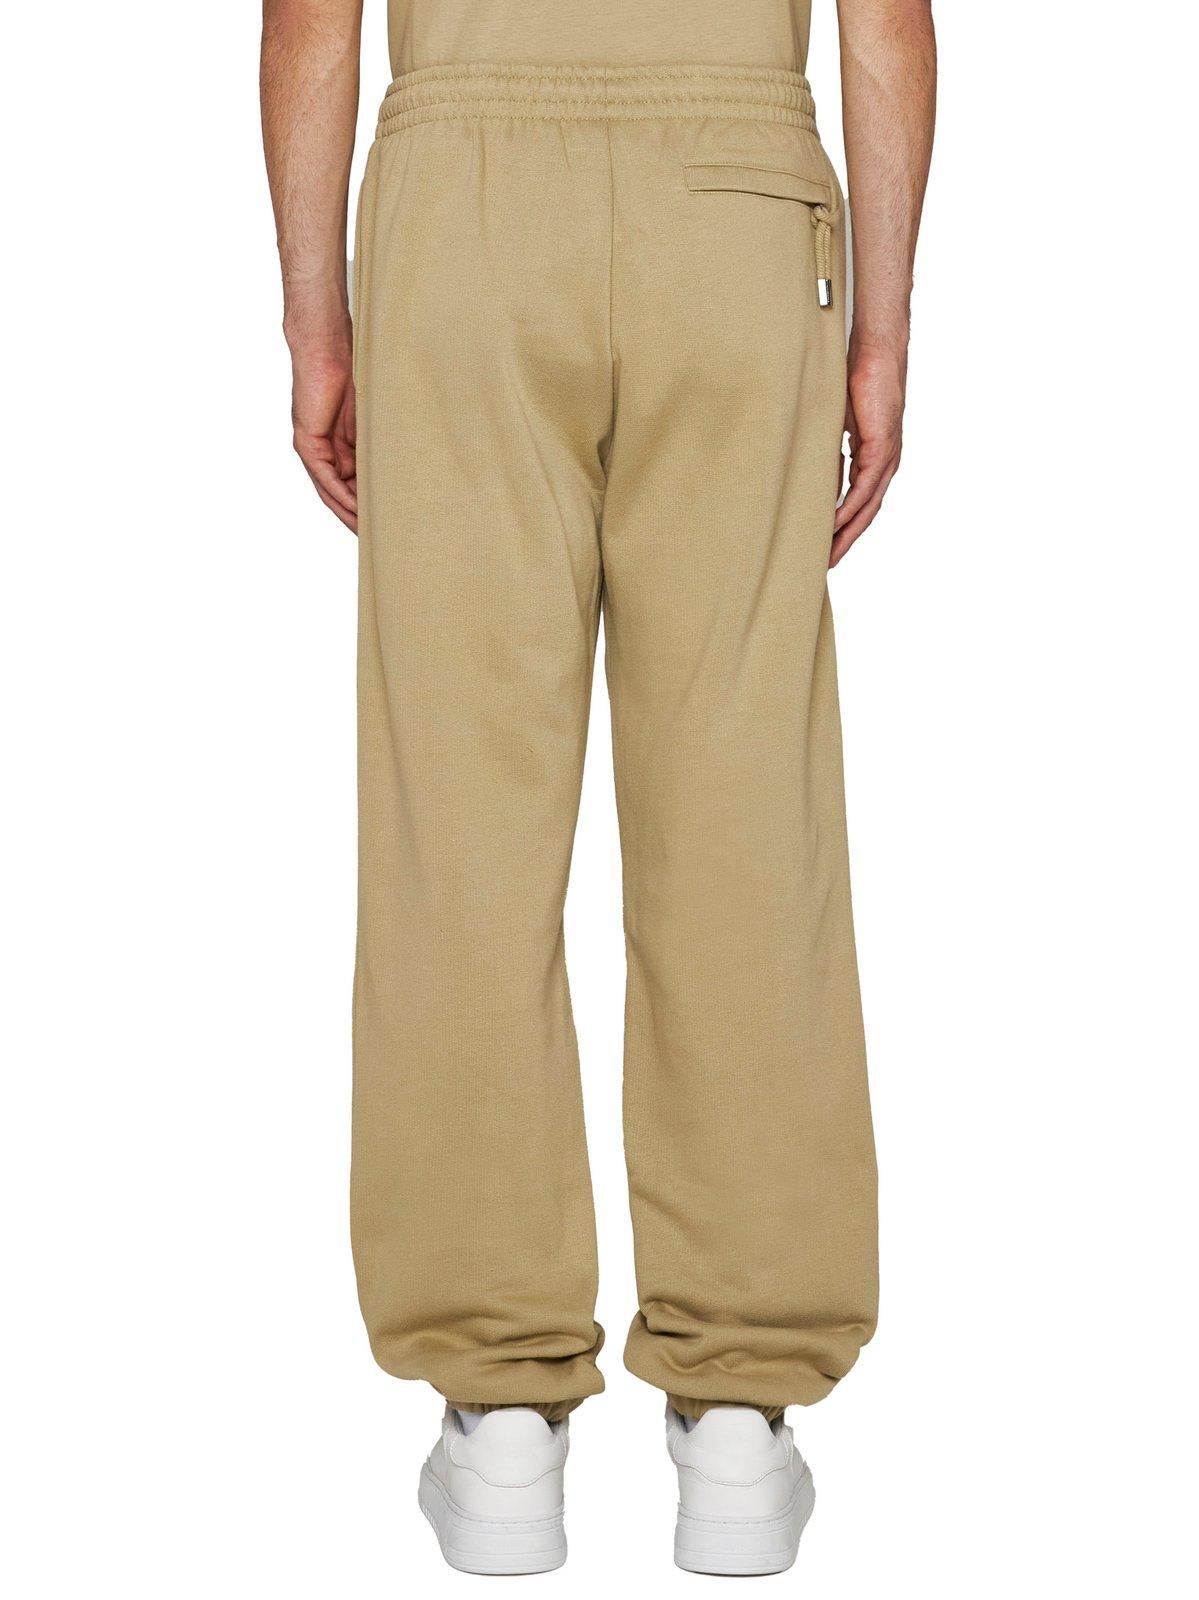 Shop Jacquemus Logo Printed Elasticated Waistband Track Pants In Brown